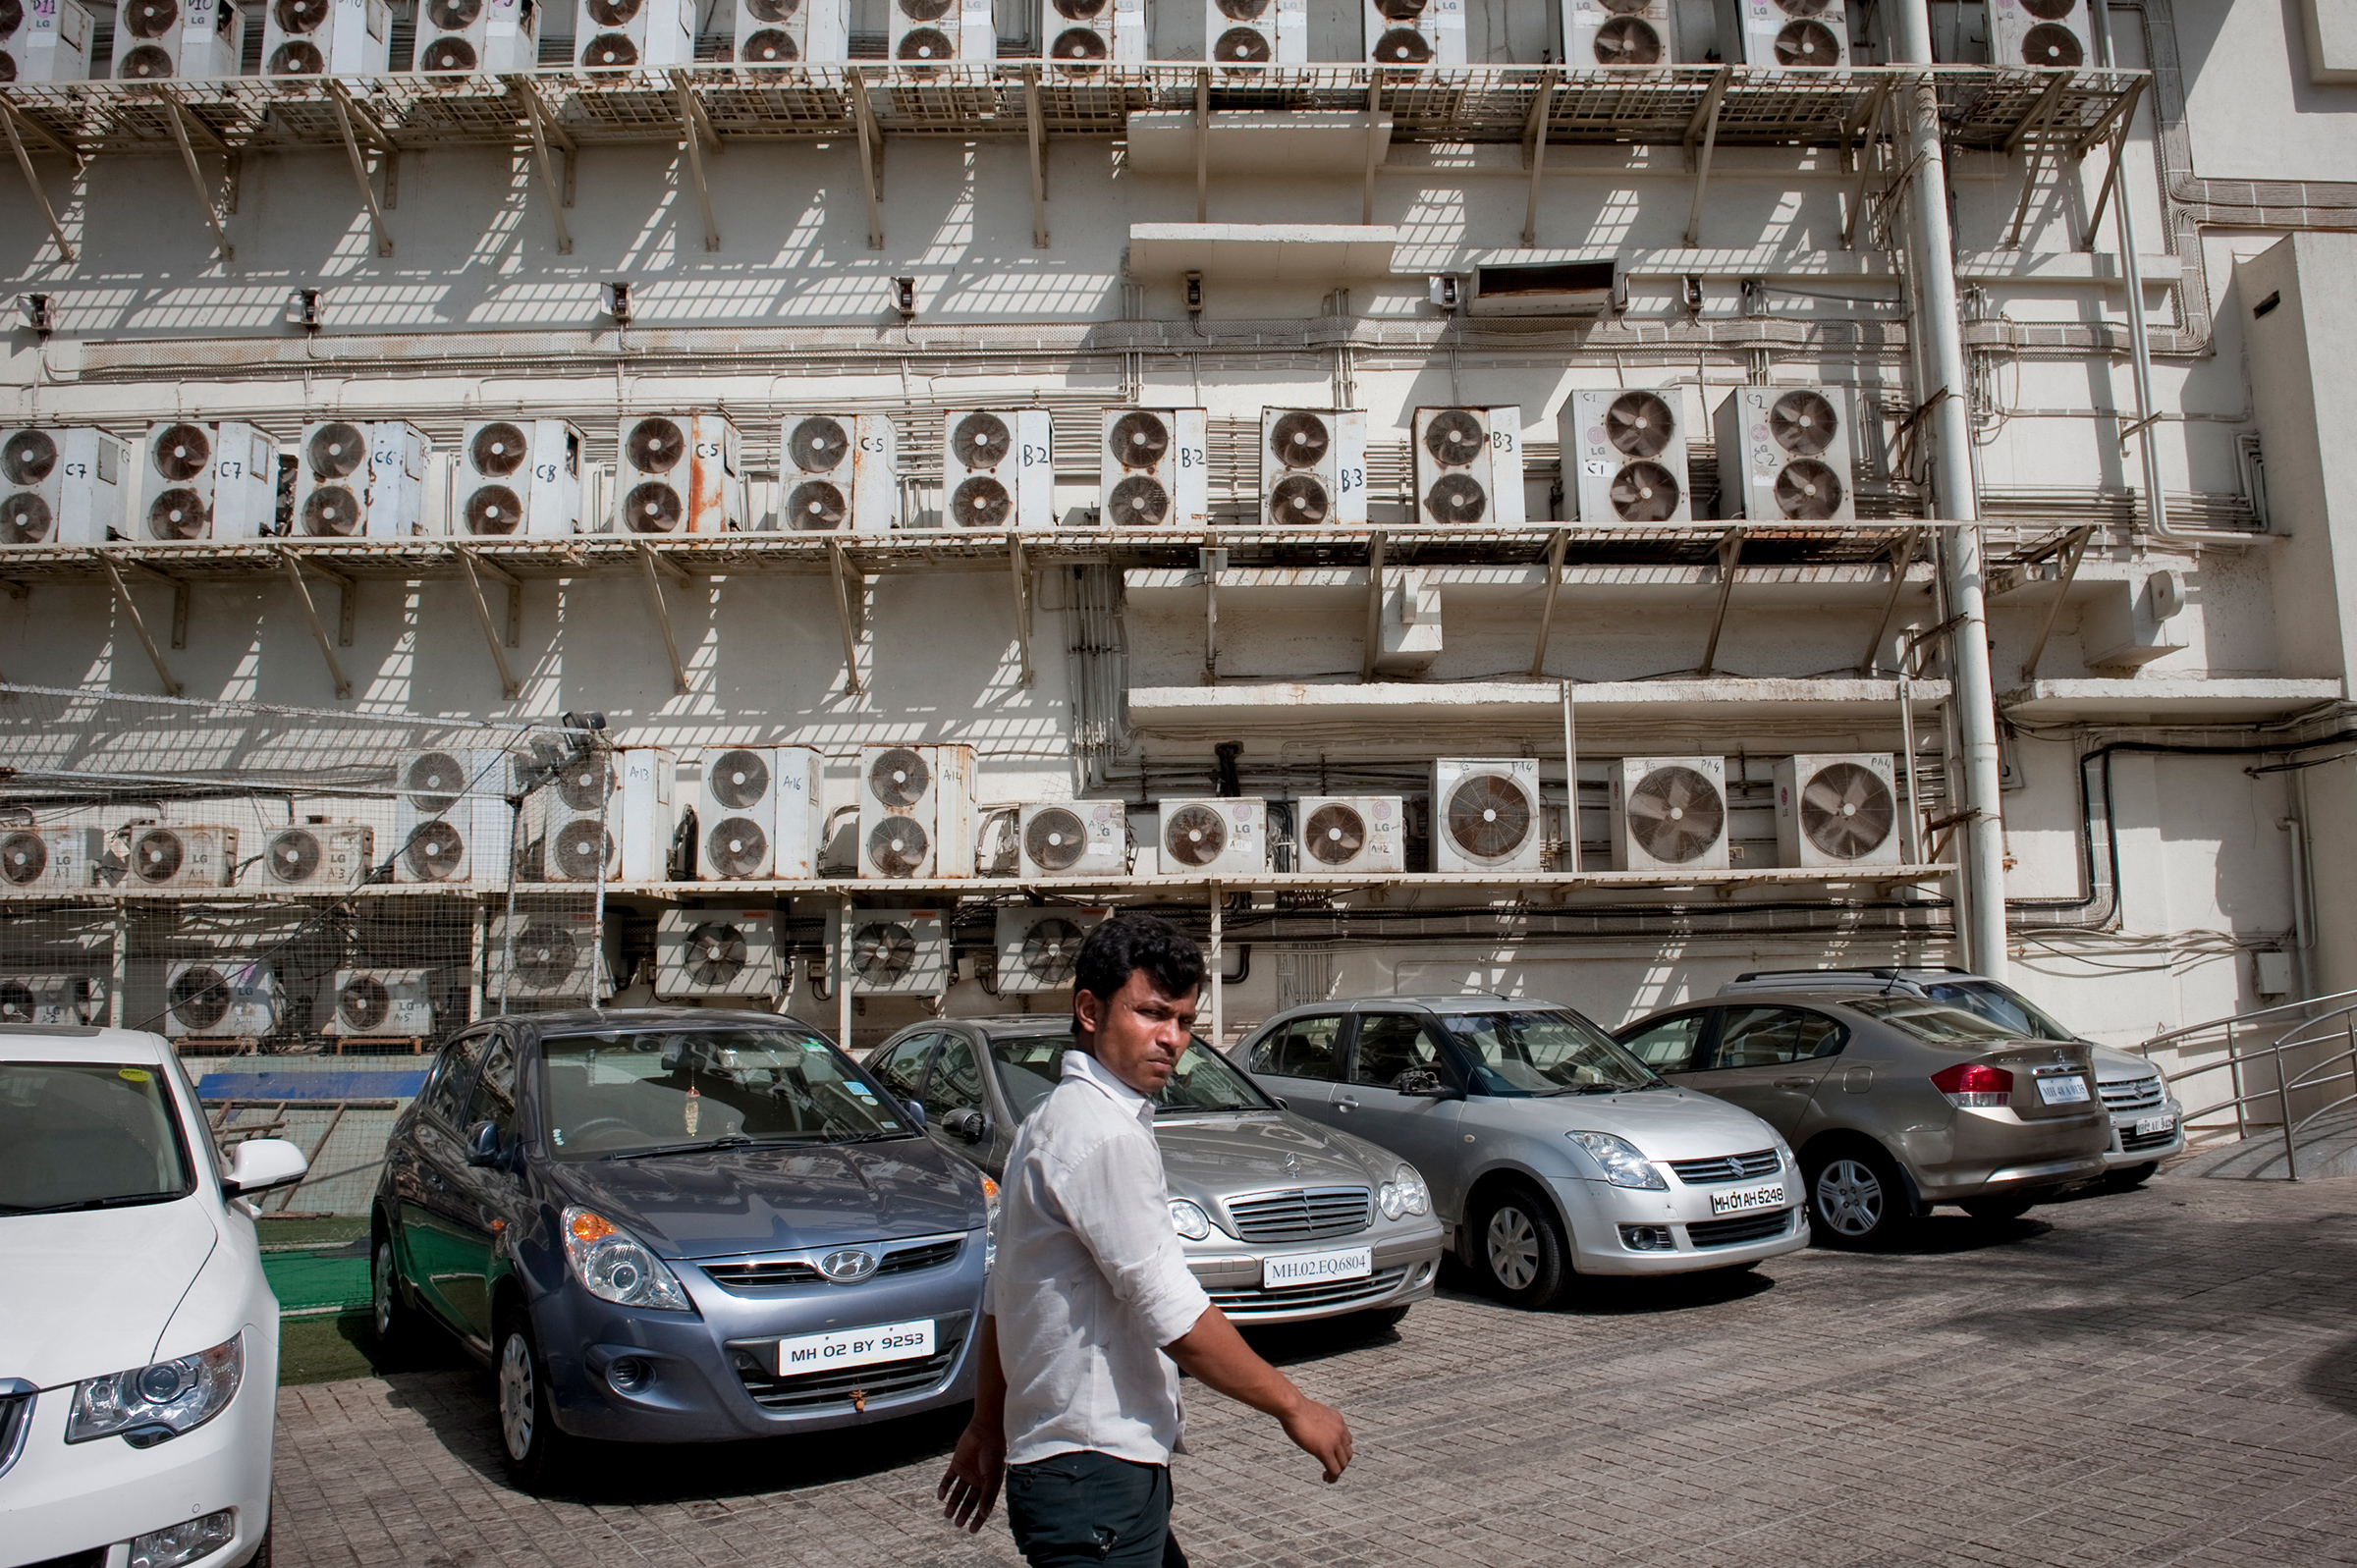 Air conditioning units installed outside of a shopping mall in Mumbai in May 2012. (Chiara Goia—The New York Times/Redux)